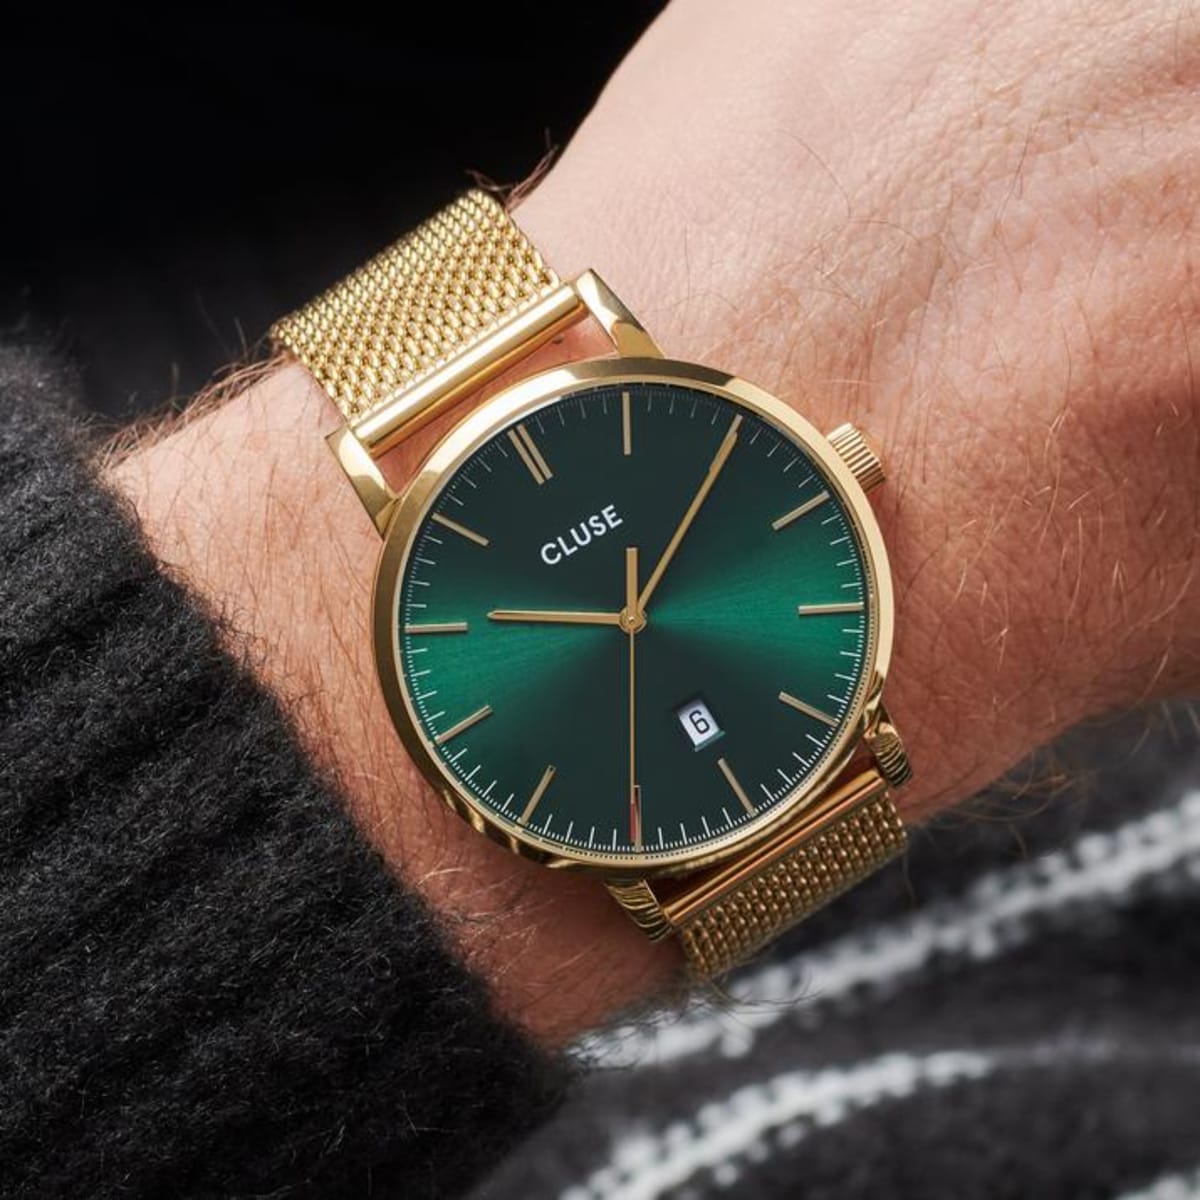 Stainless steel and sleek minimalism are at the core of our Aravis collection for men. This 3-hand watch features a date functionality, set in the bottom centre of the watch face. Contrasting green and gold create a classic yet playful combination, with subtle red detailing on the second hand giving additional finesse to the model. Water resistance: 5 ATM.